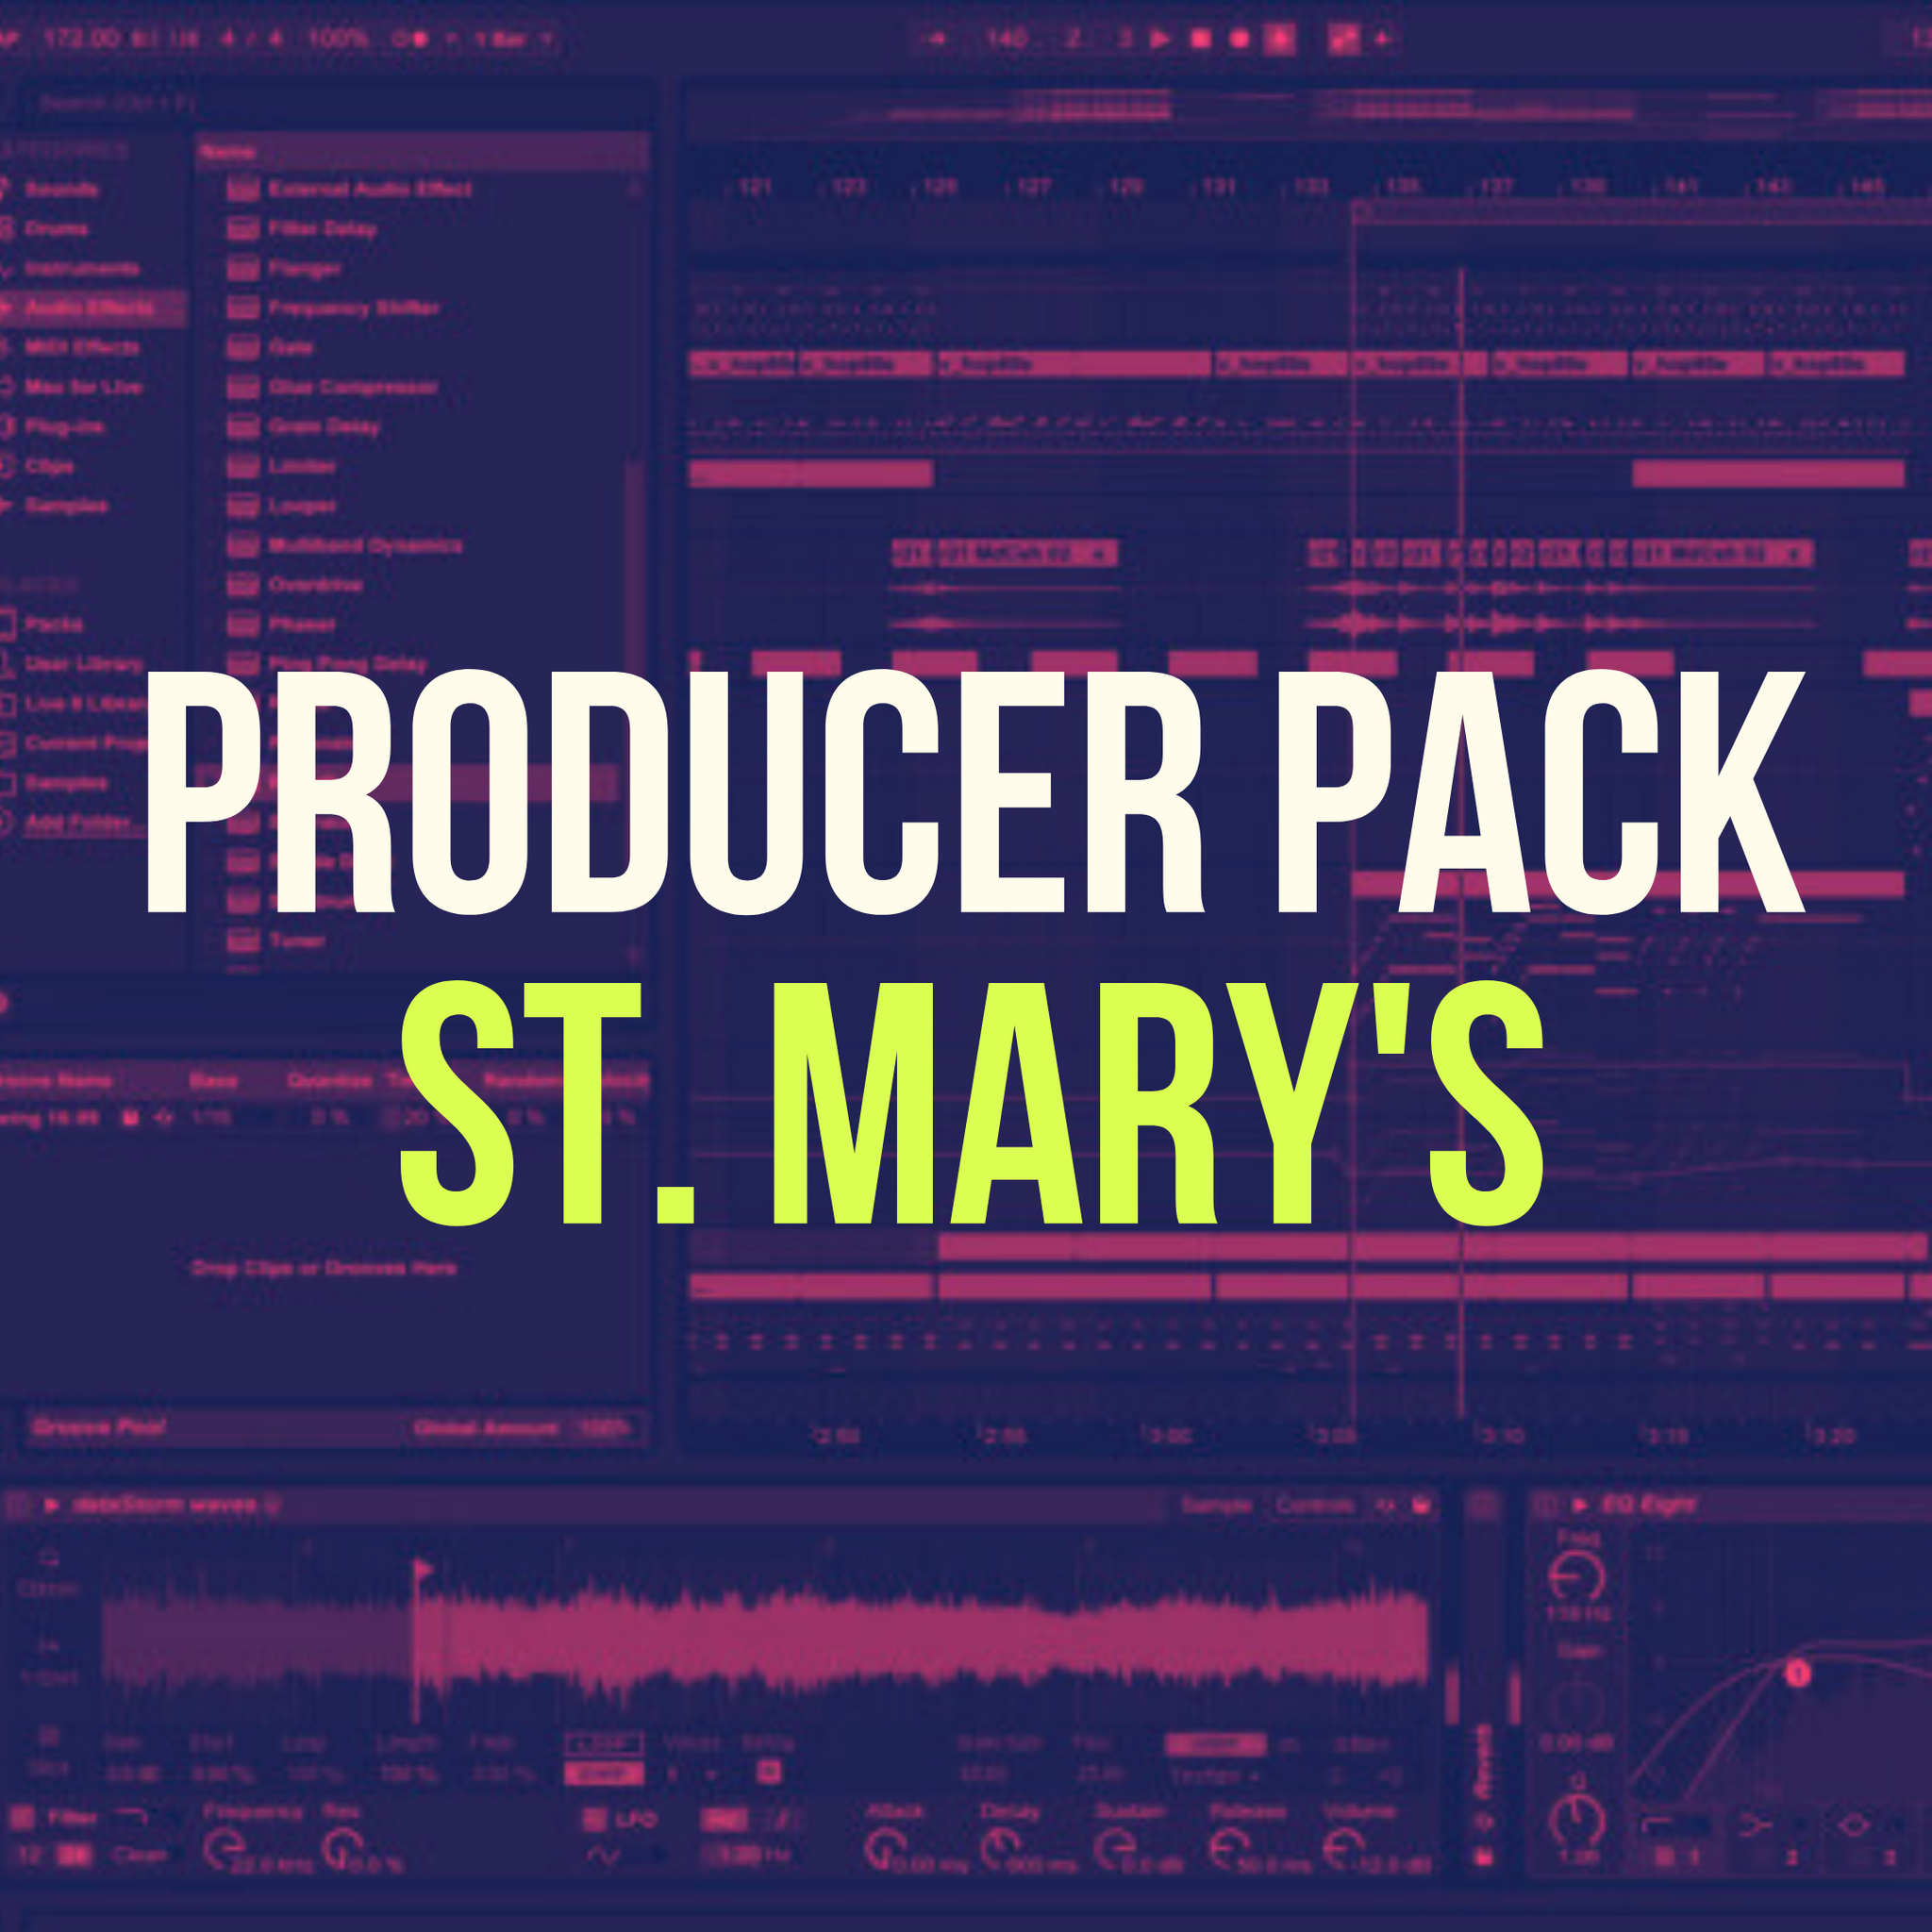 'St. Mary's' Producer Pack